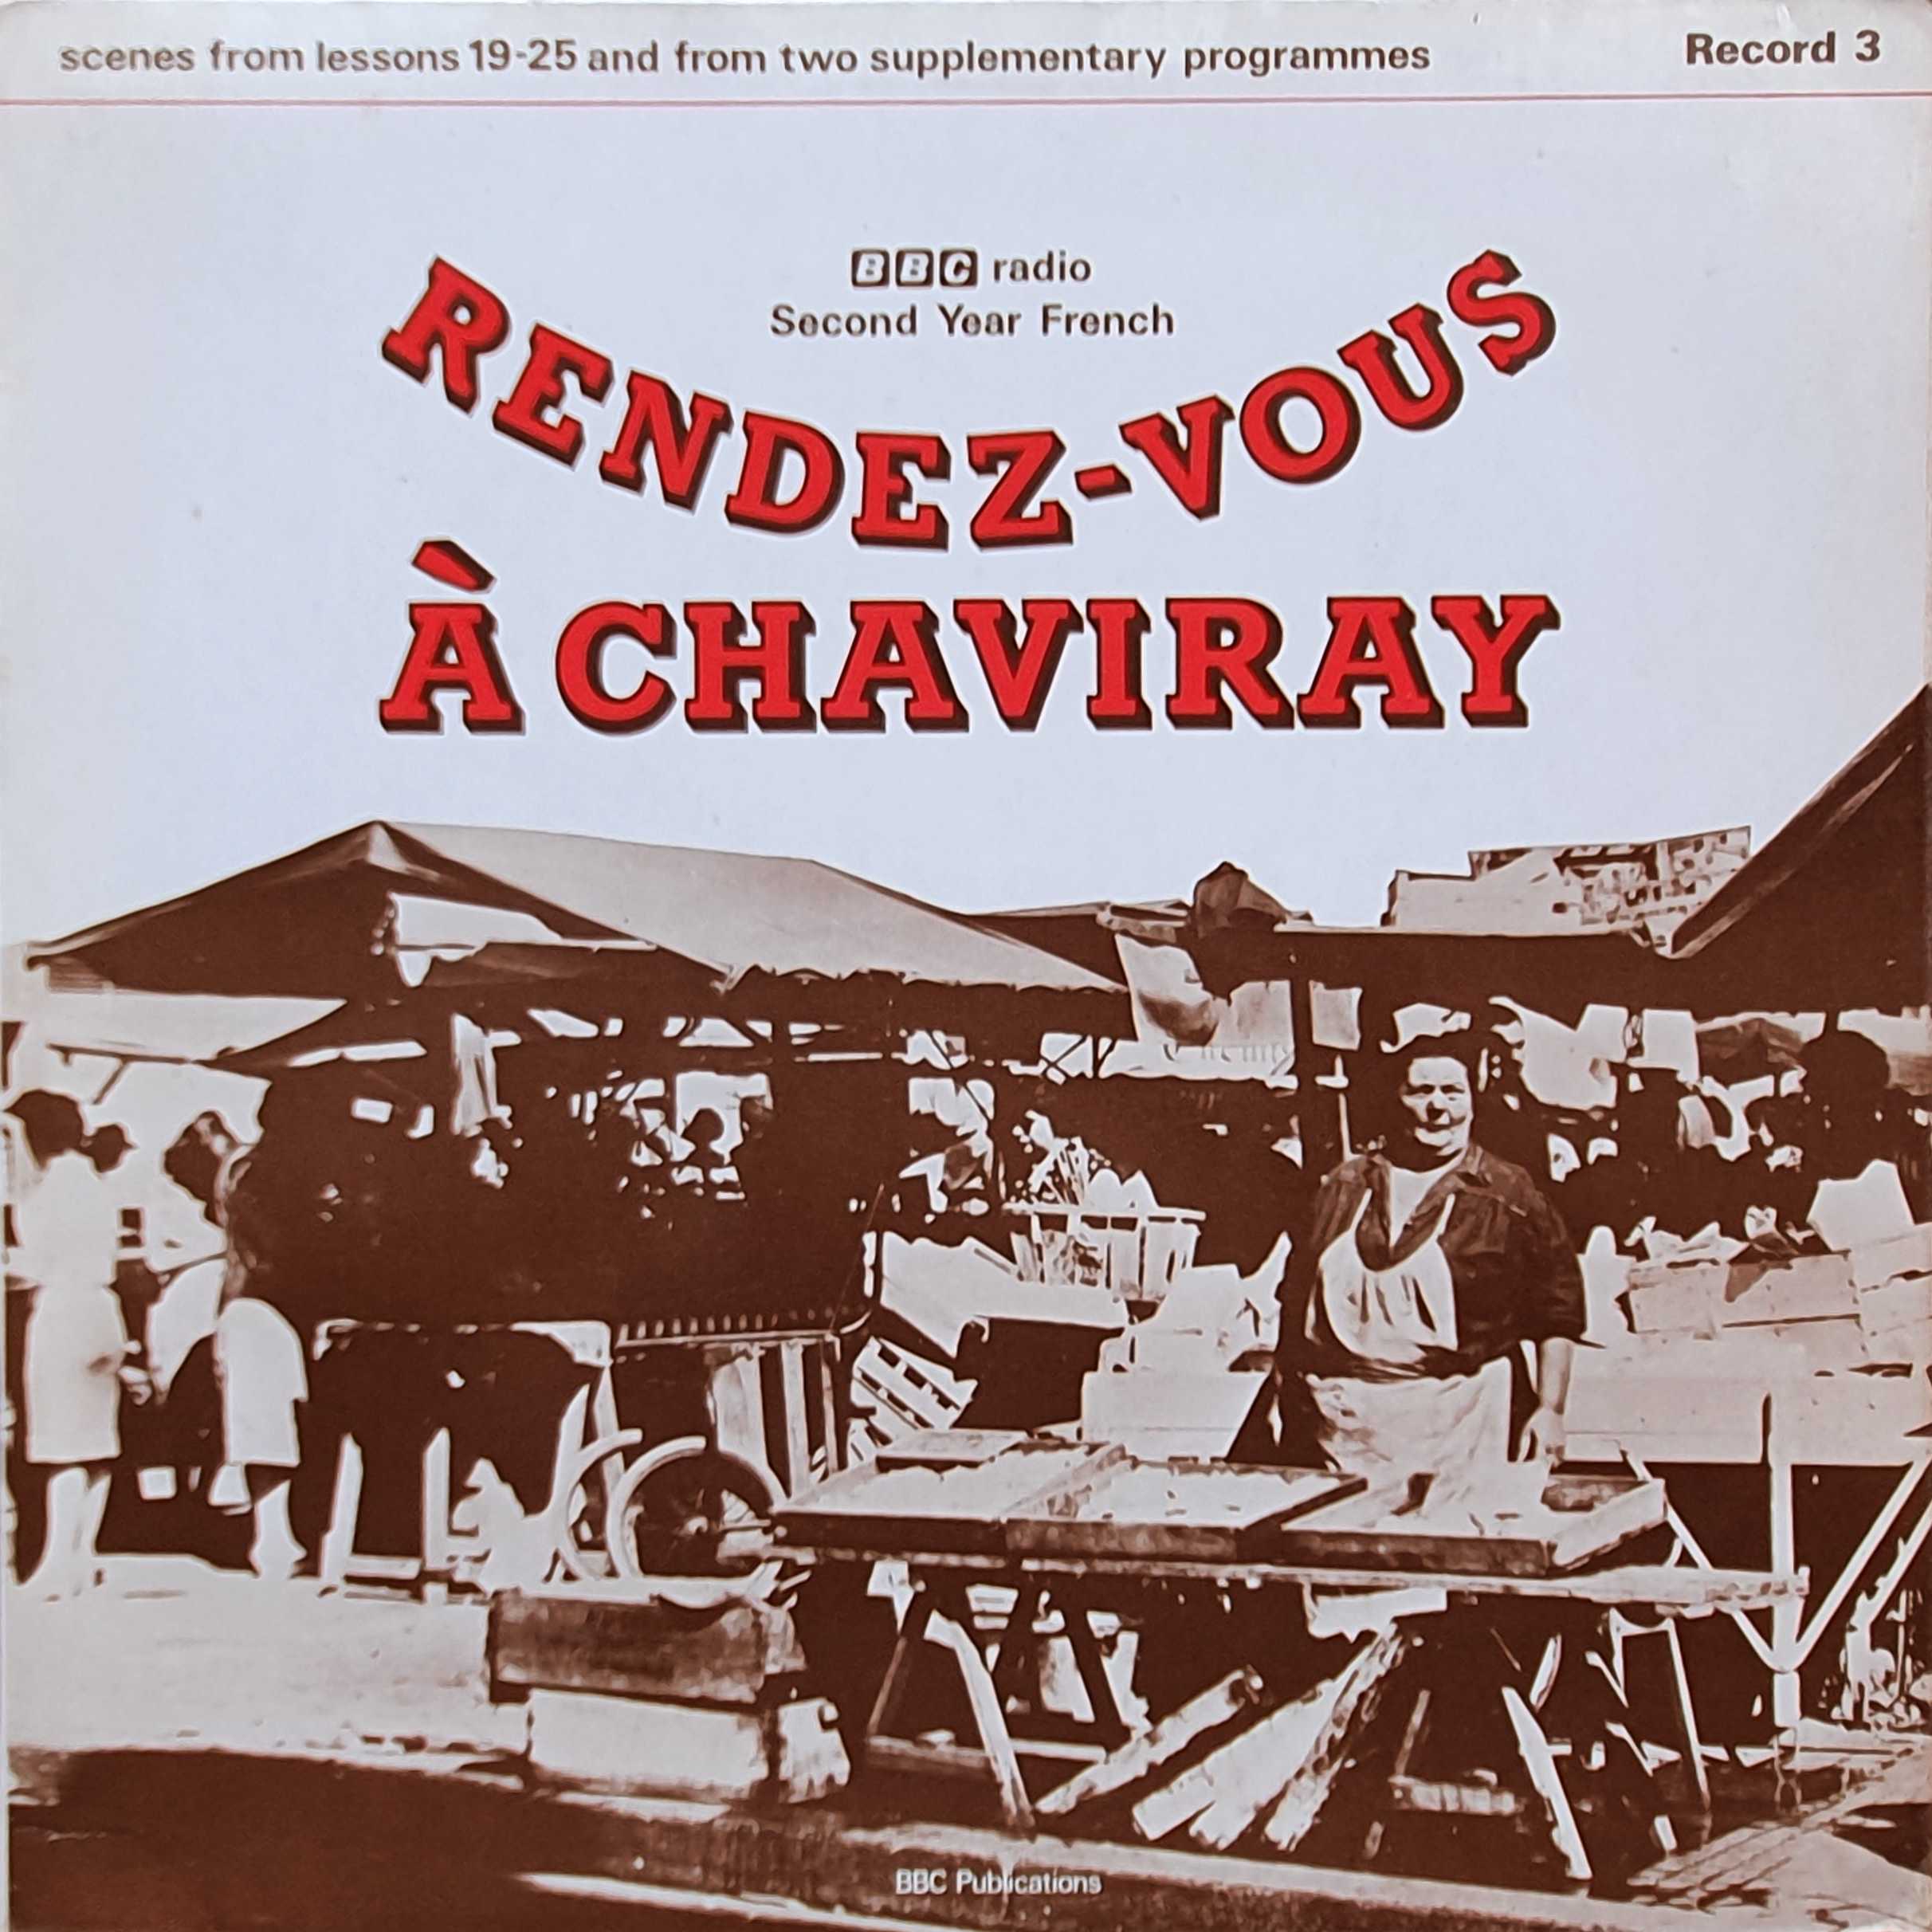 Picture of OP 199/200 Rendez-vous a Chaviray - BBC radio Second Year French - Record 3 - Lessons 19 - 25 by artist John Ross / Madeleine Le Cunff from the BBC albums - Records and Tapes library